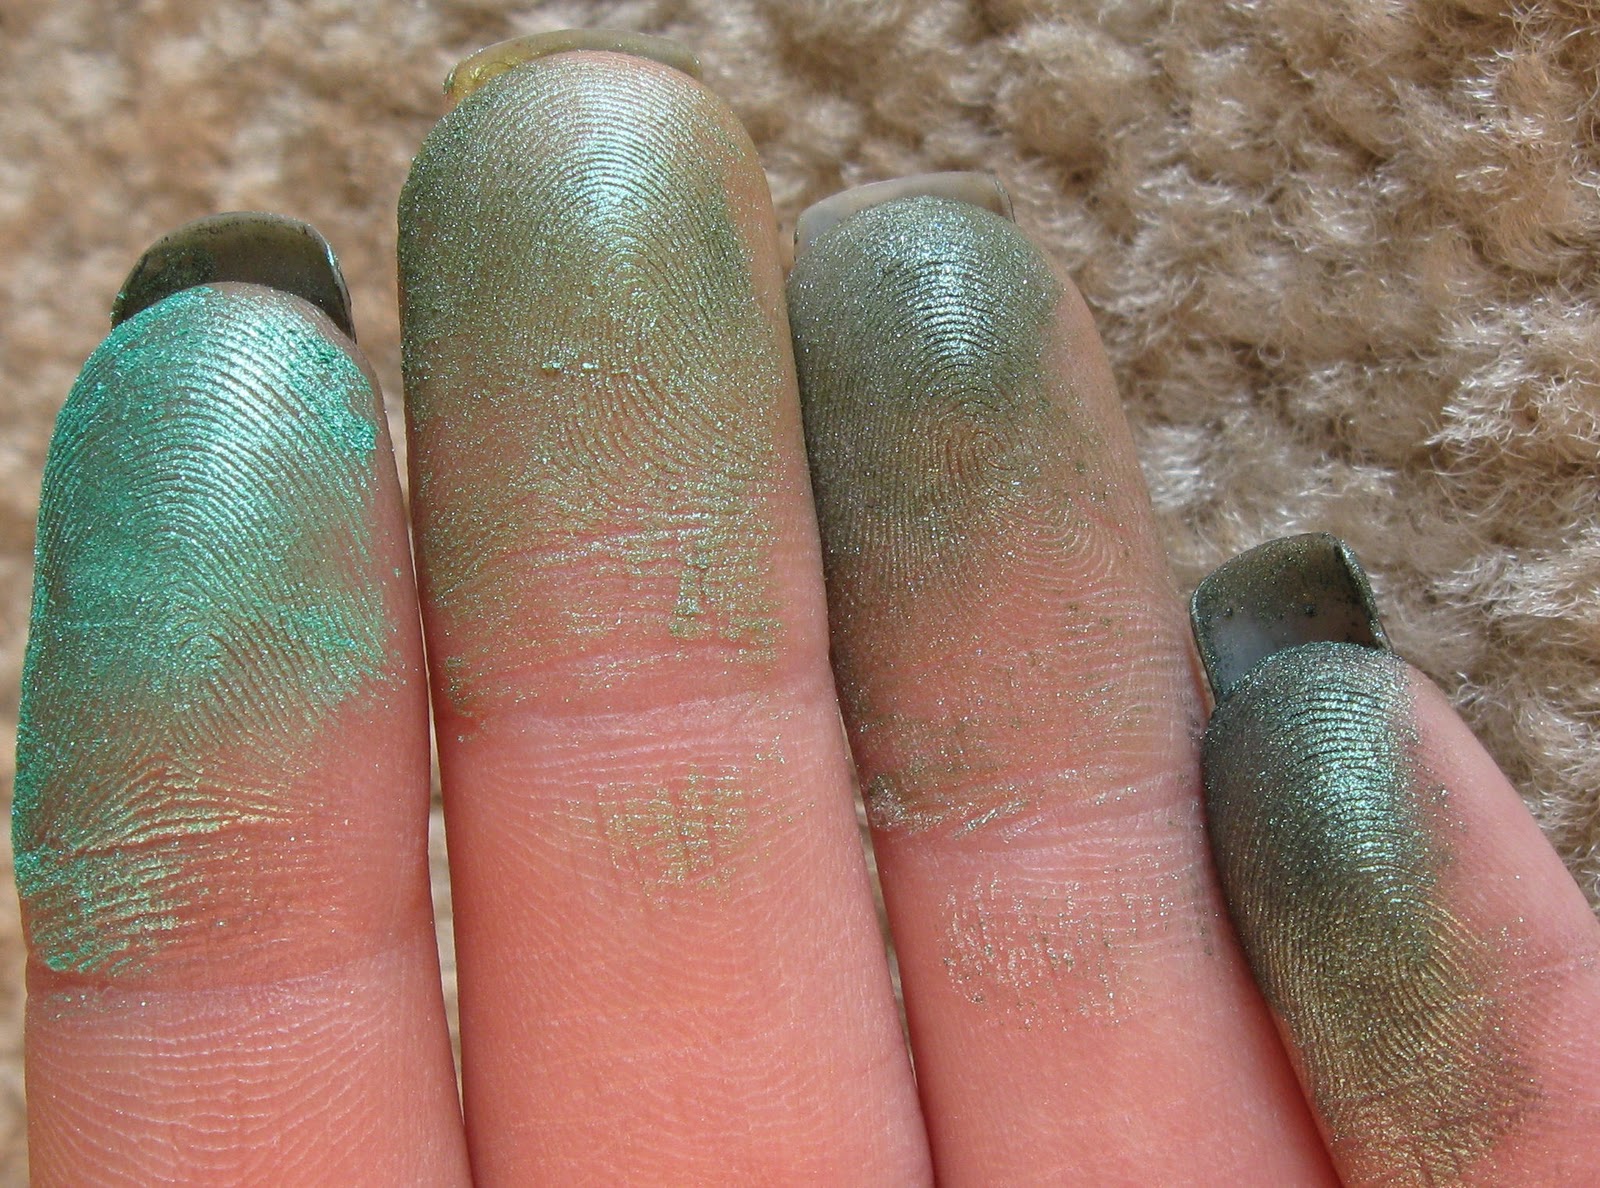 swatchcat: TKB Trading Pigments & Micas: Review and Swatches, Part 2